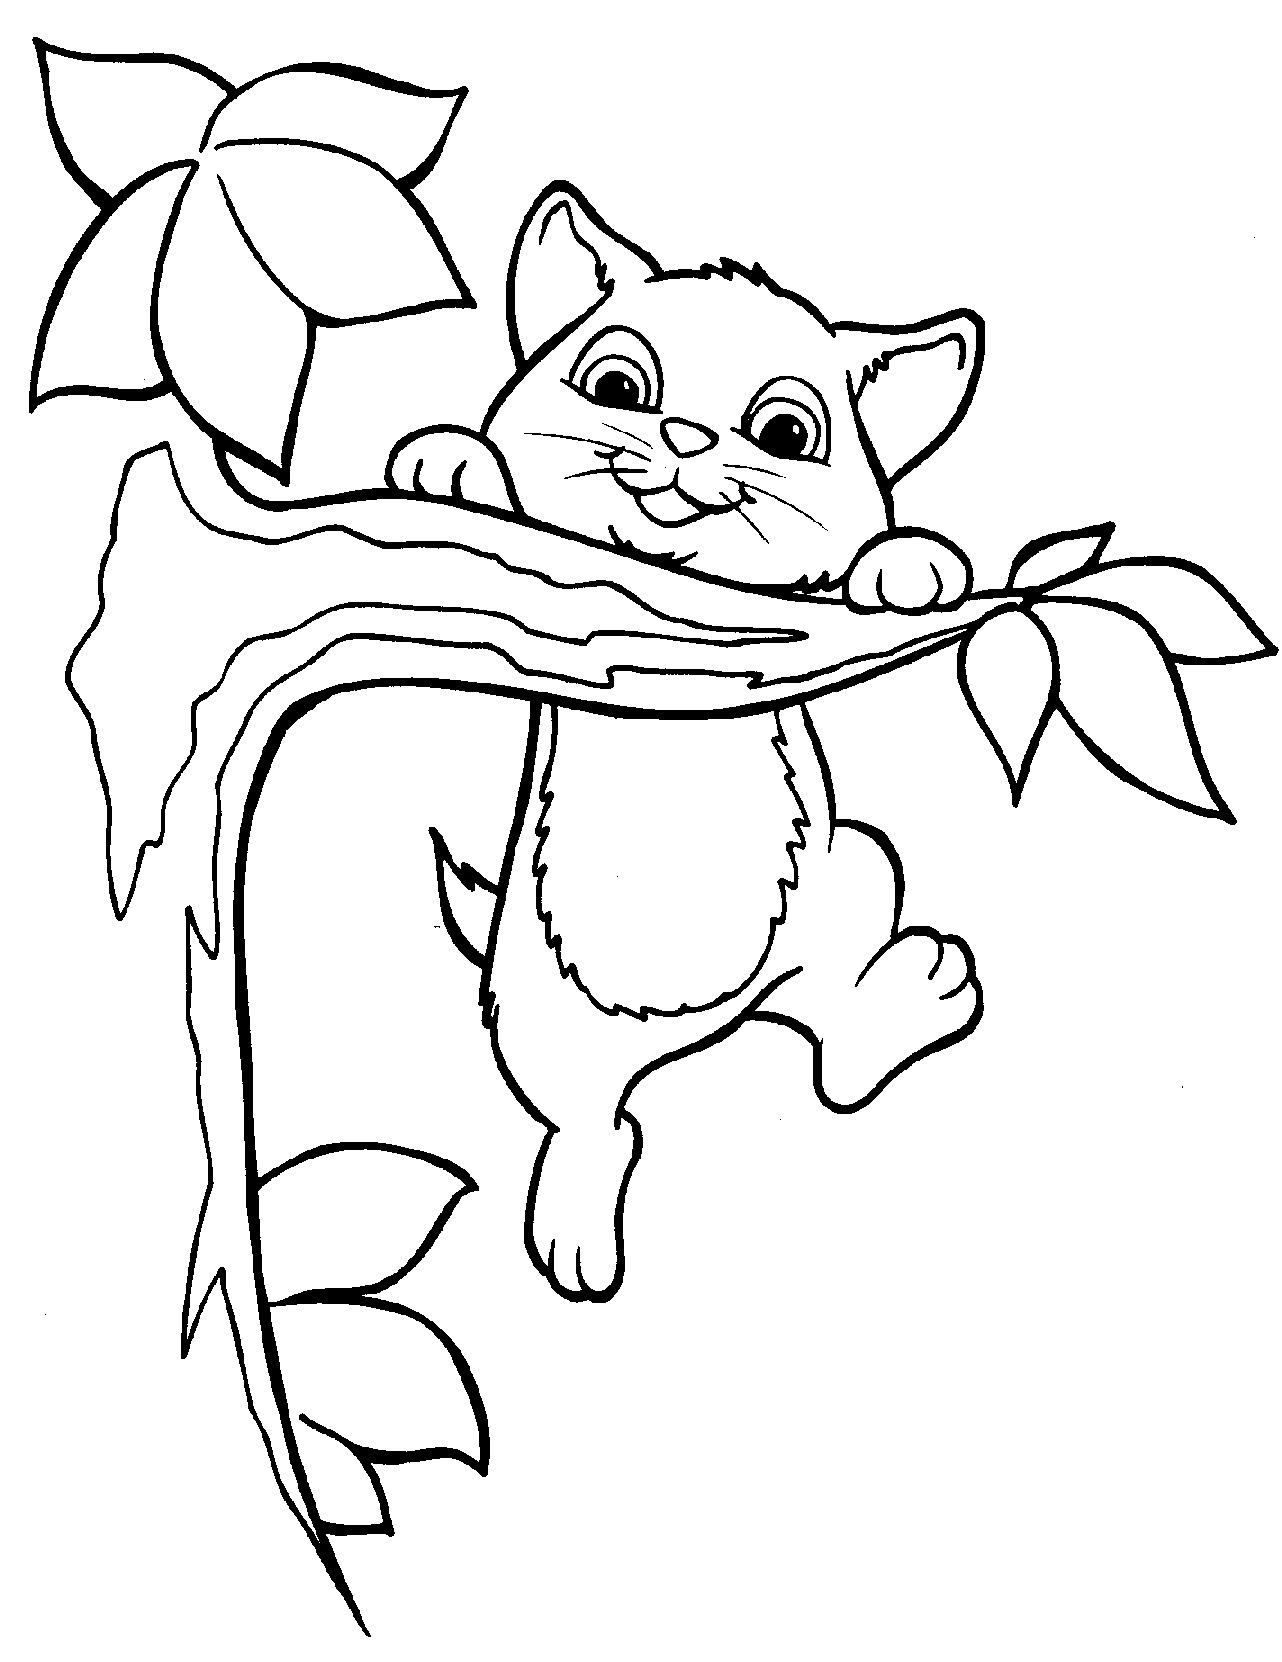 Kitten Coloring Pages
 Free Printable Kitten Coloring Pages For Kids Best